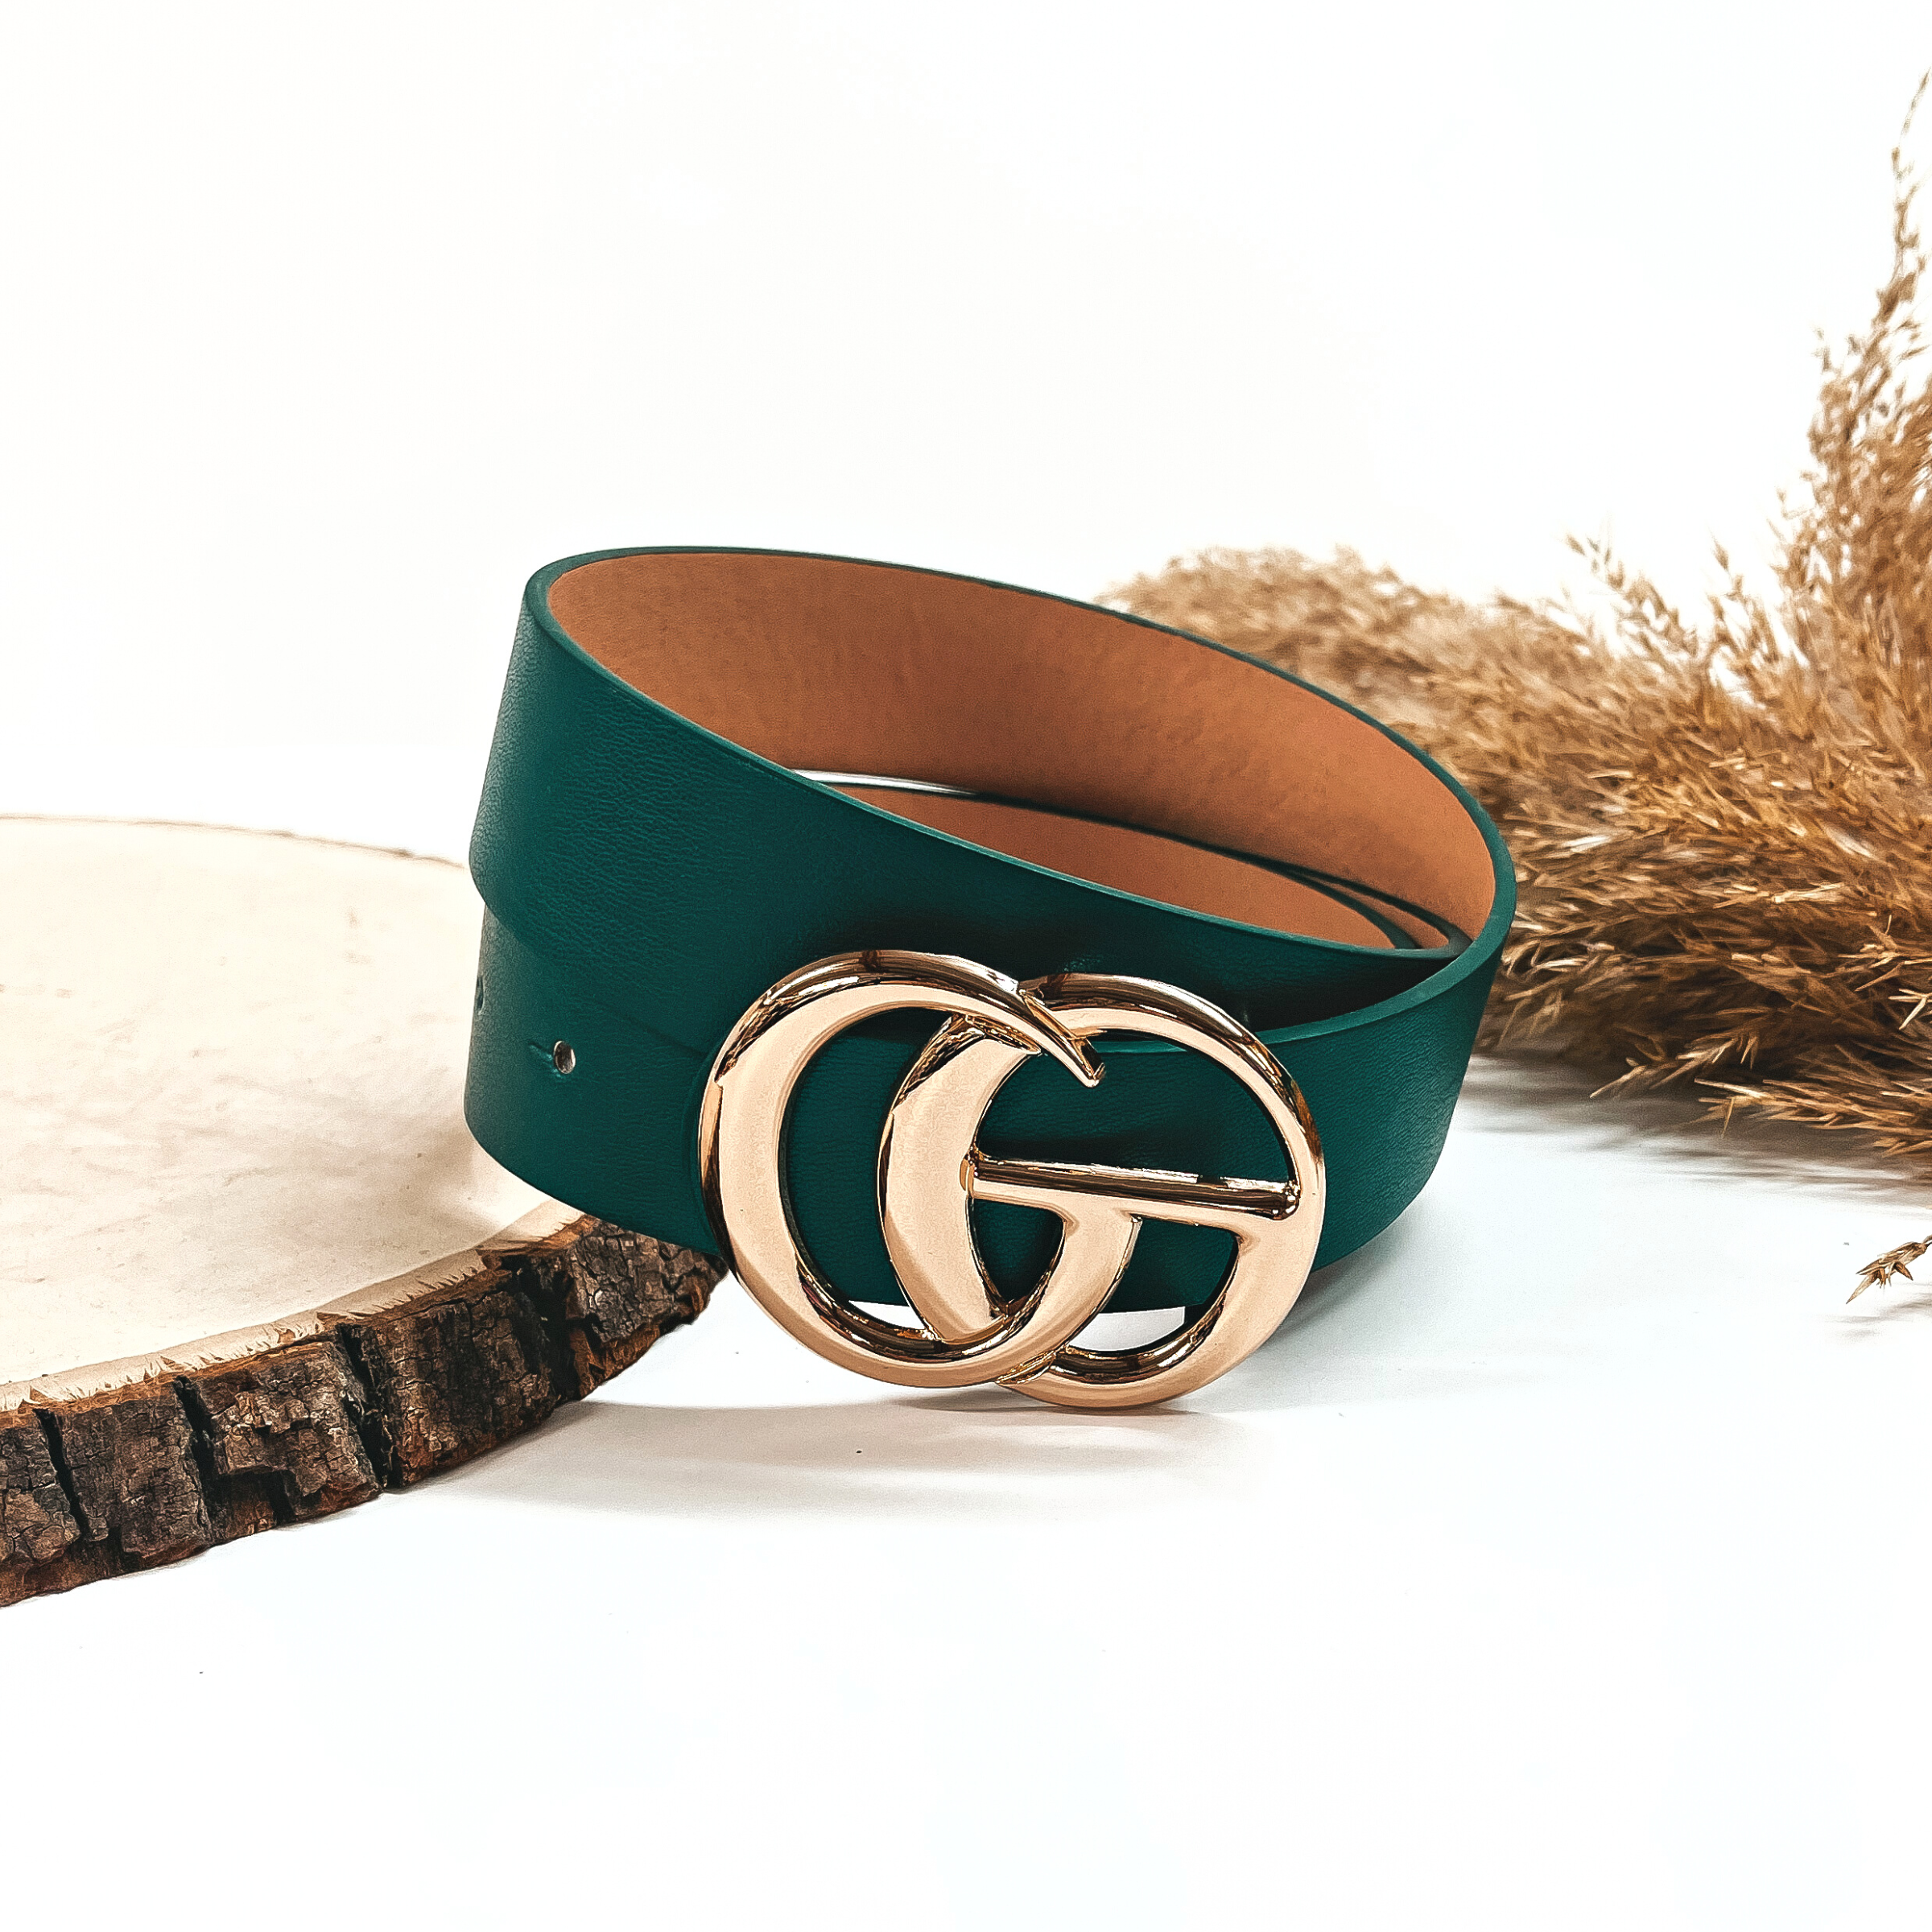 This is a dark green rolled up belt with a gold buckle in the center. This belt  is placed on a slab of wood and on a white background, there is a brown plant  in the back as decor.